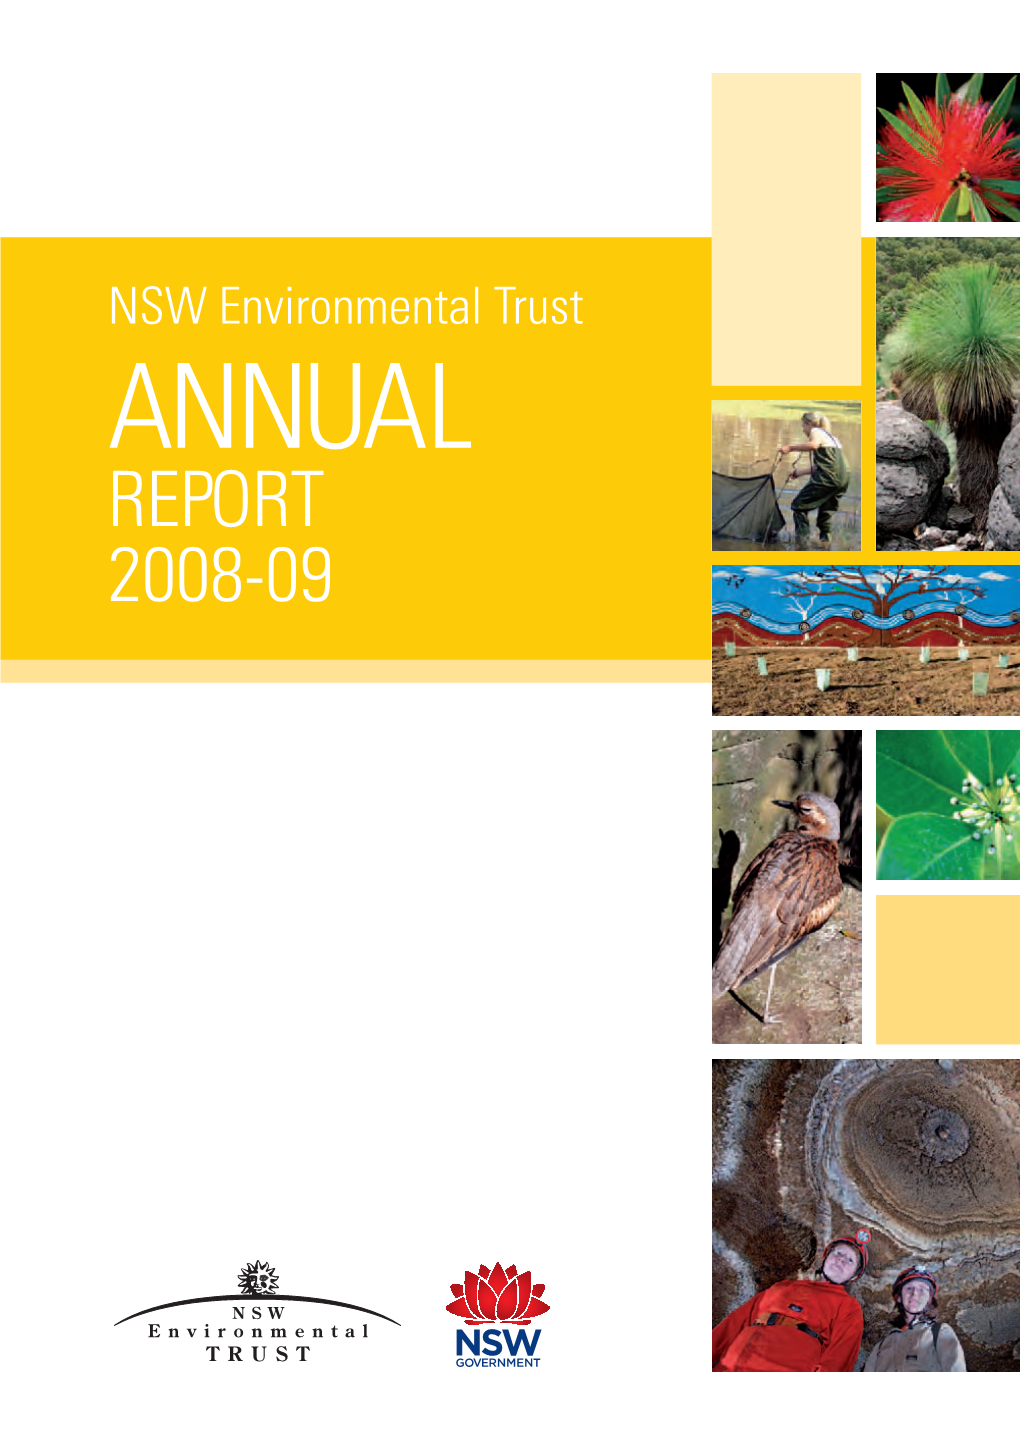 NSW Environmental Trust Annual Report 2008-09Download